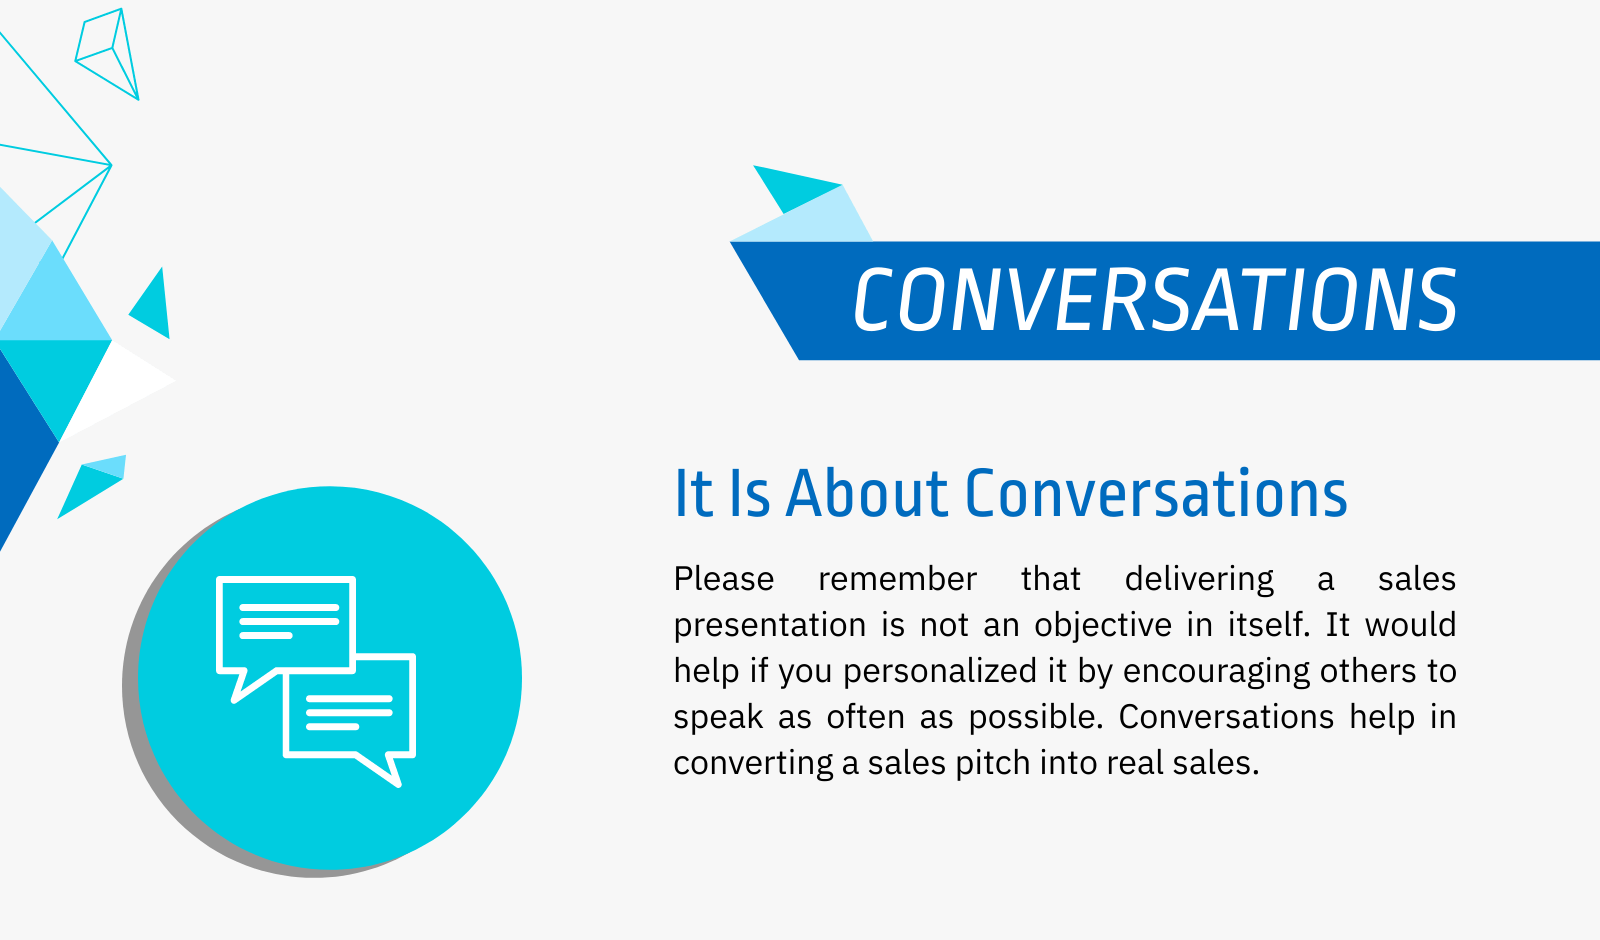 conversational sales pitch example